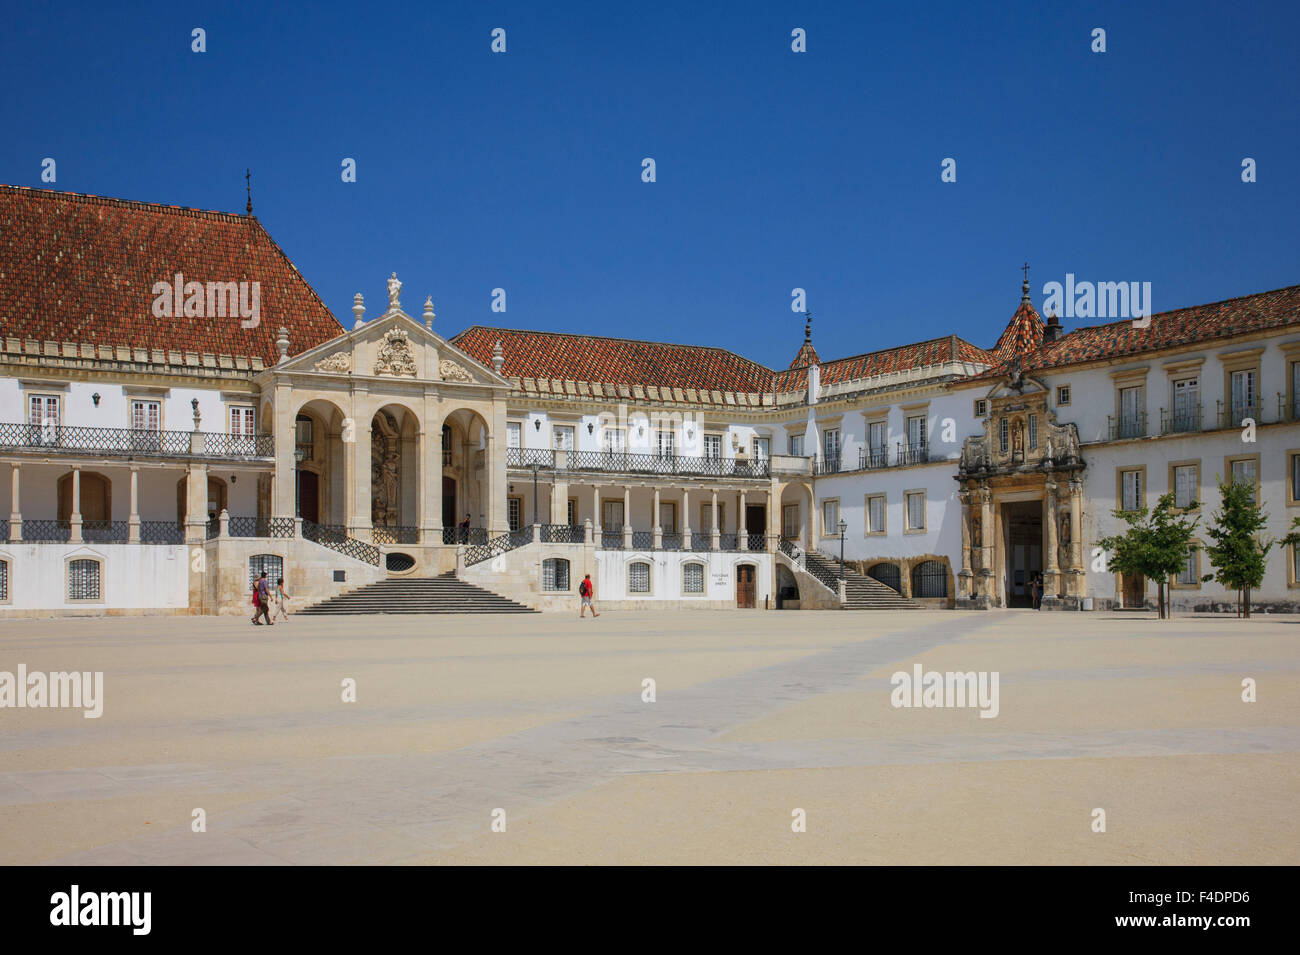 Courtyard of the one of the oldest universities in Portugal, in Coimbra, which houses the Joanina Library. Stock Photo